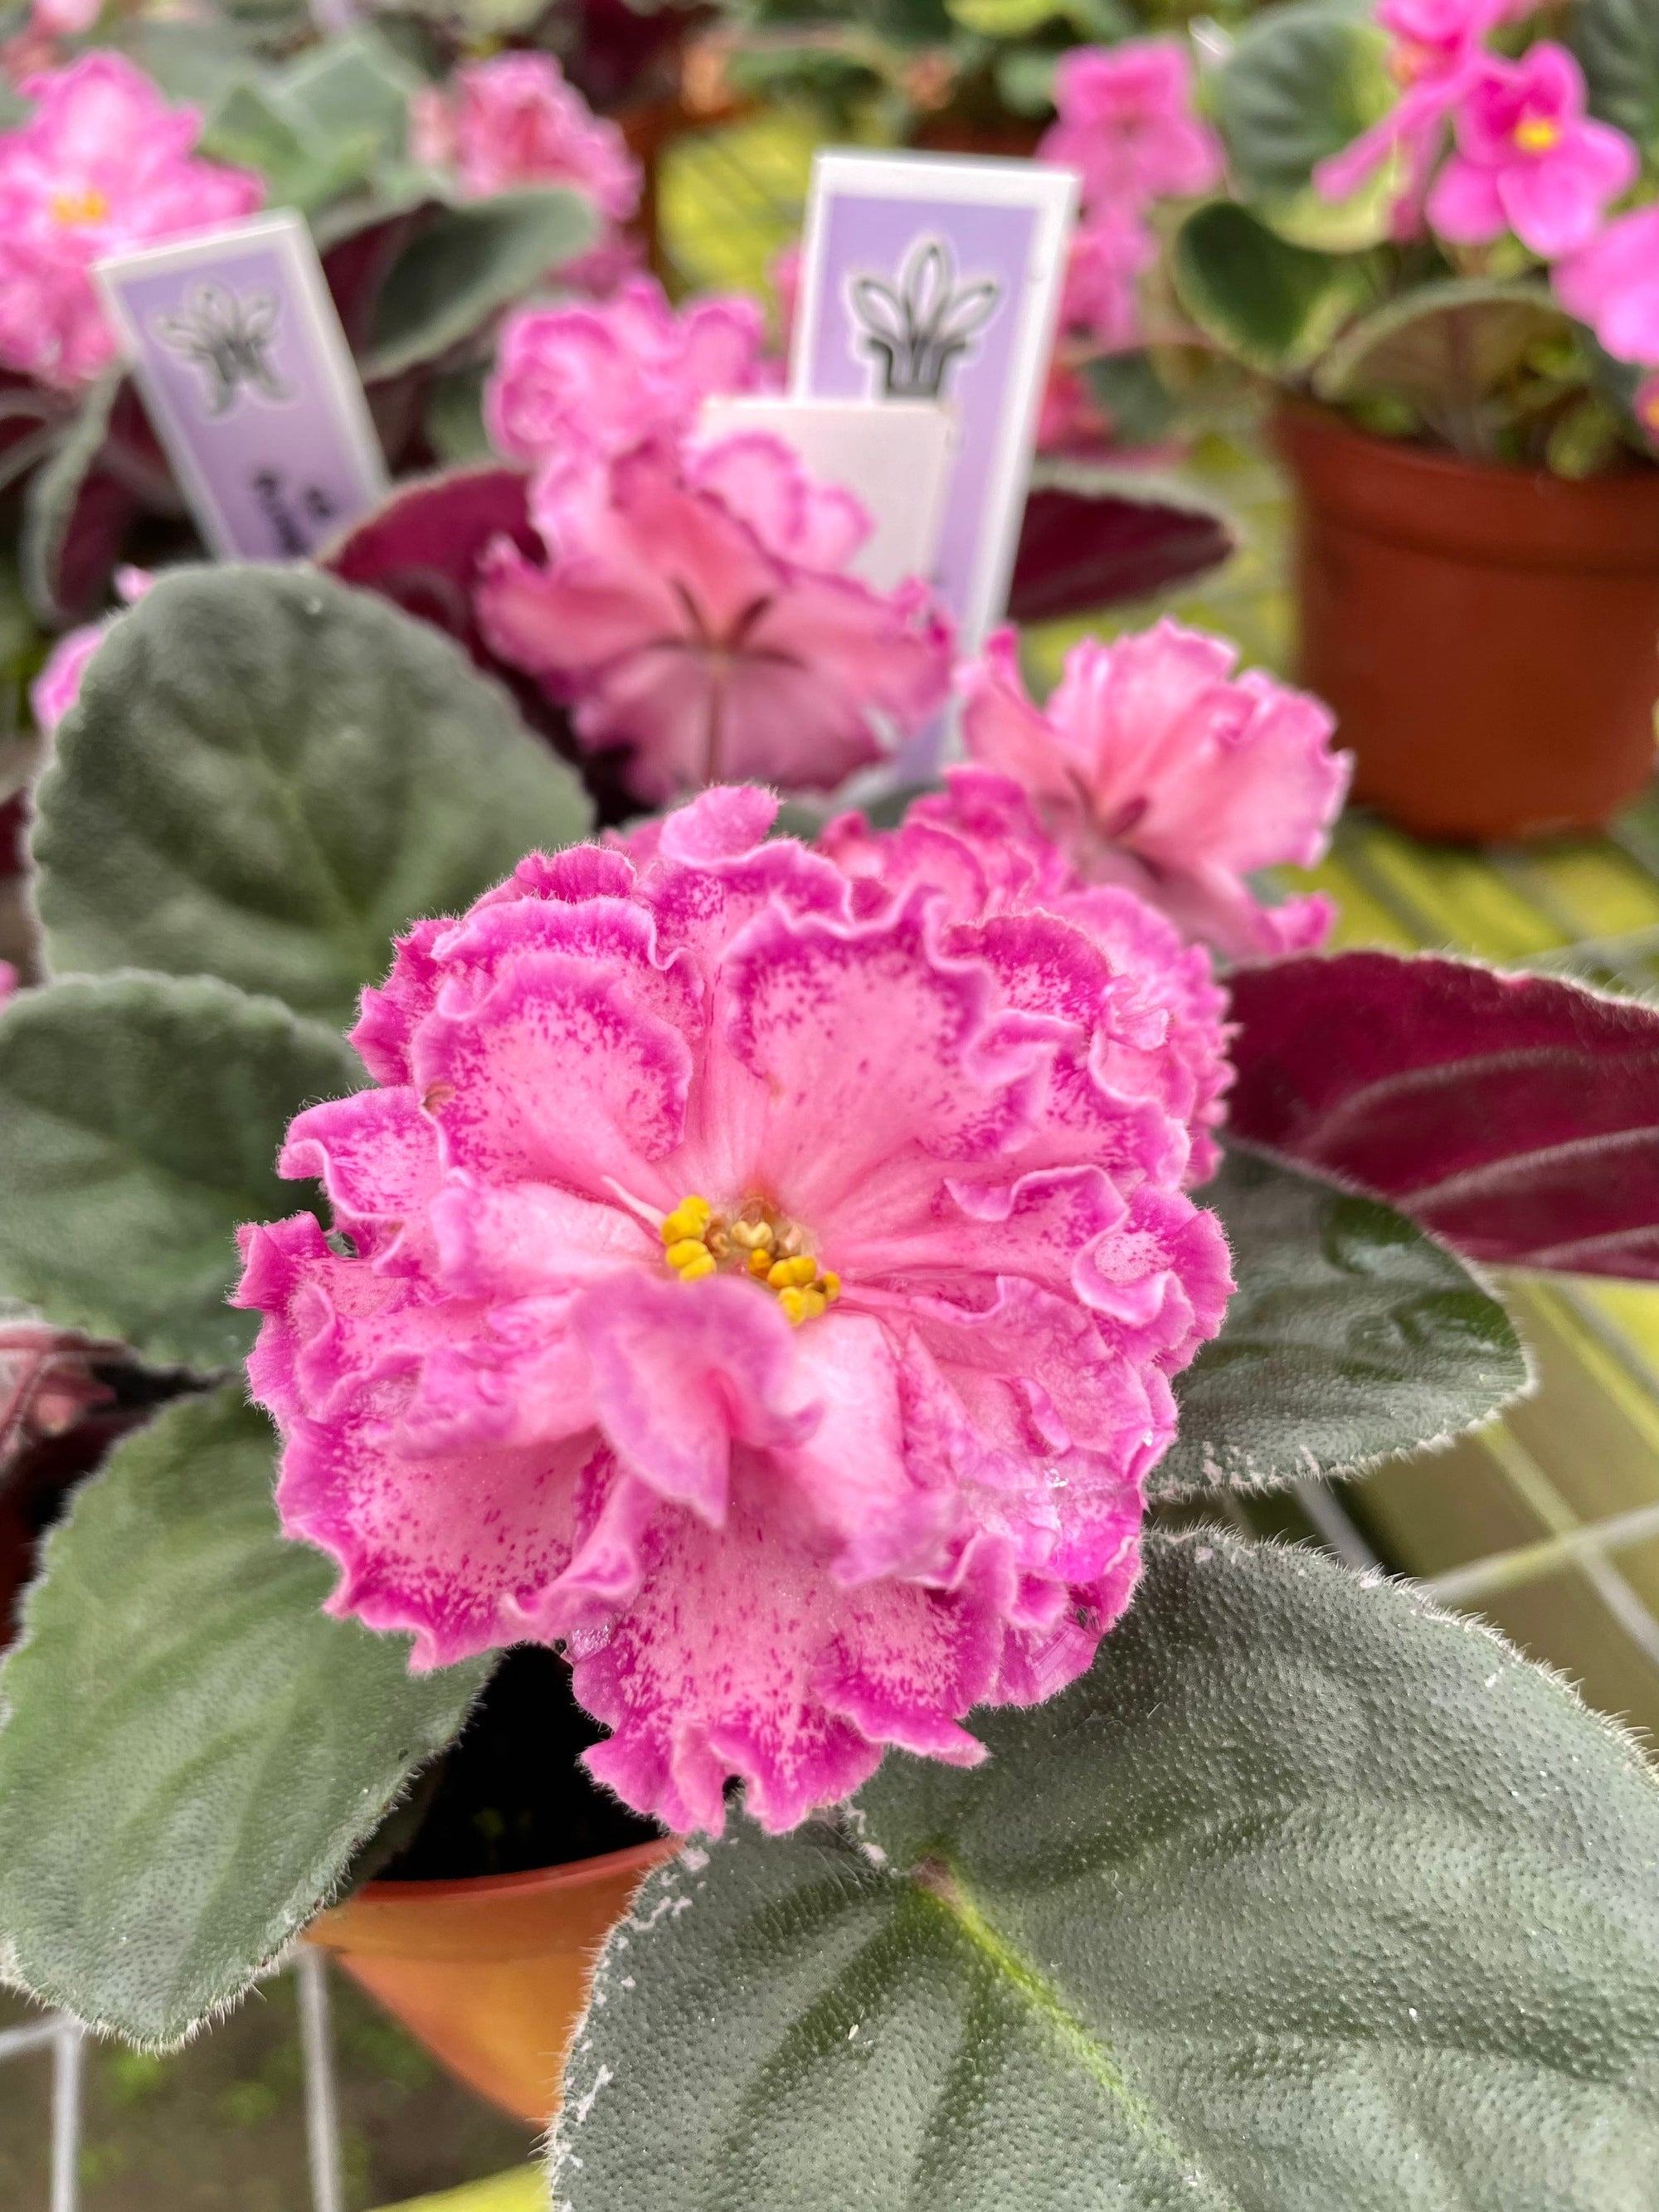 Live house plant variegated pink double bloom Harmonys African Violet LE Rimma garden 4 flower Potted gift